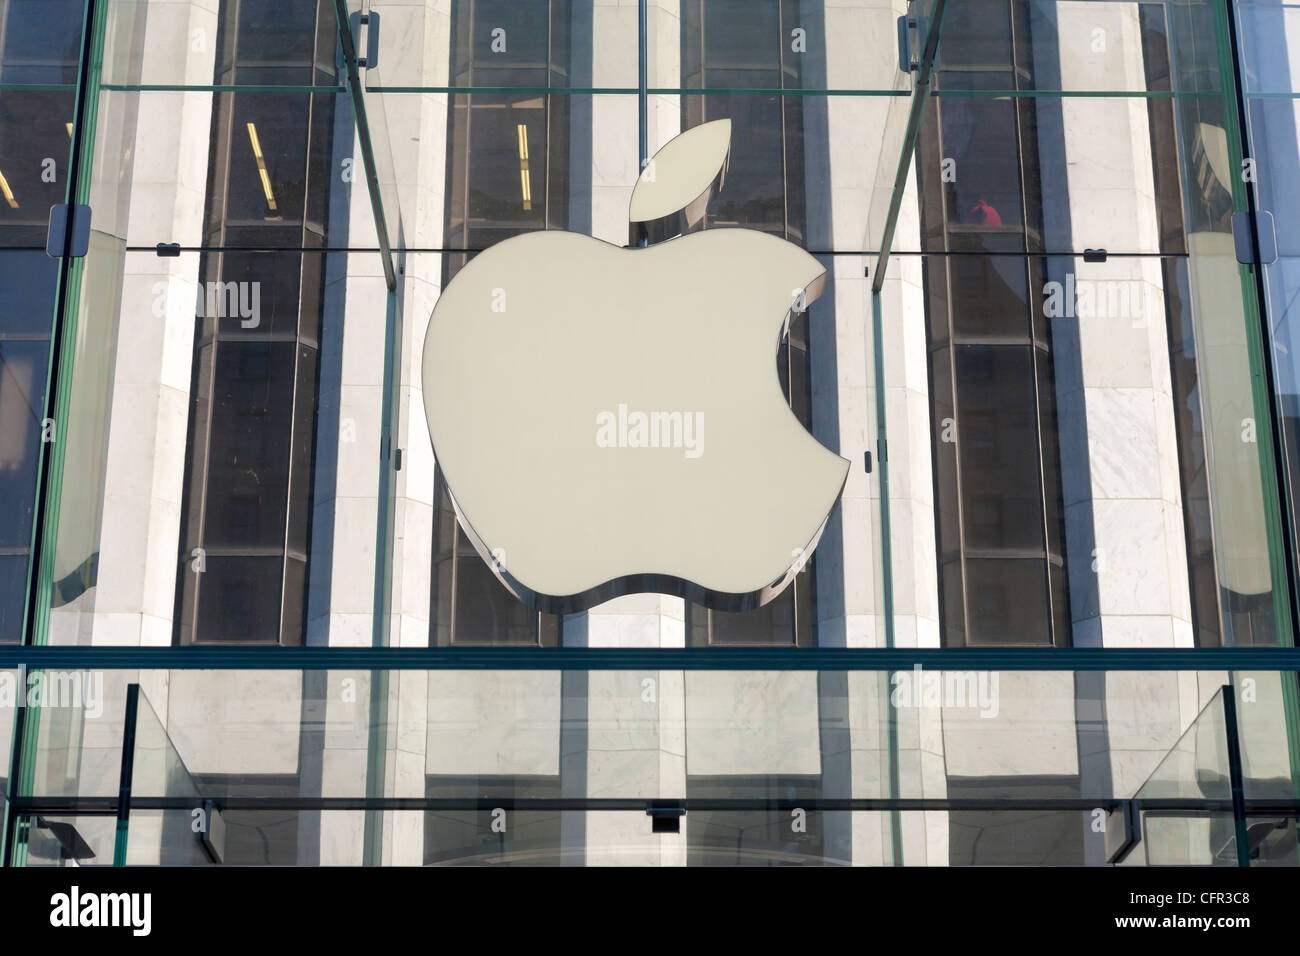 The entrance to the flagship Apple store on 5th Avenue in New York City Stock Photo